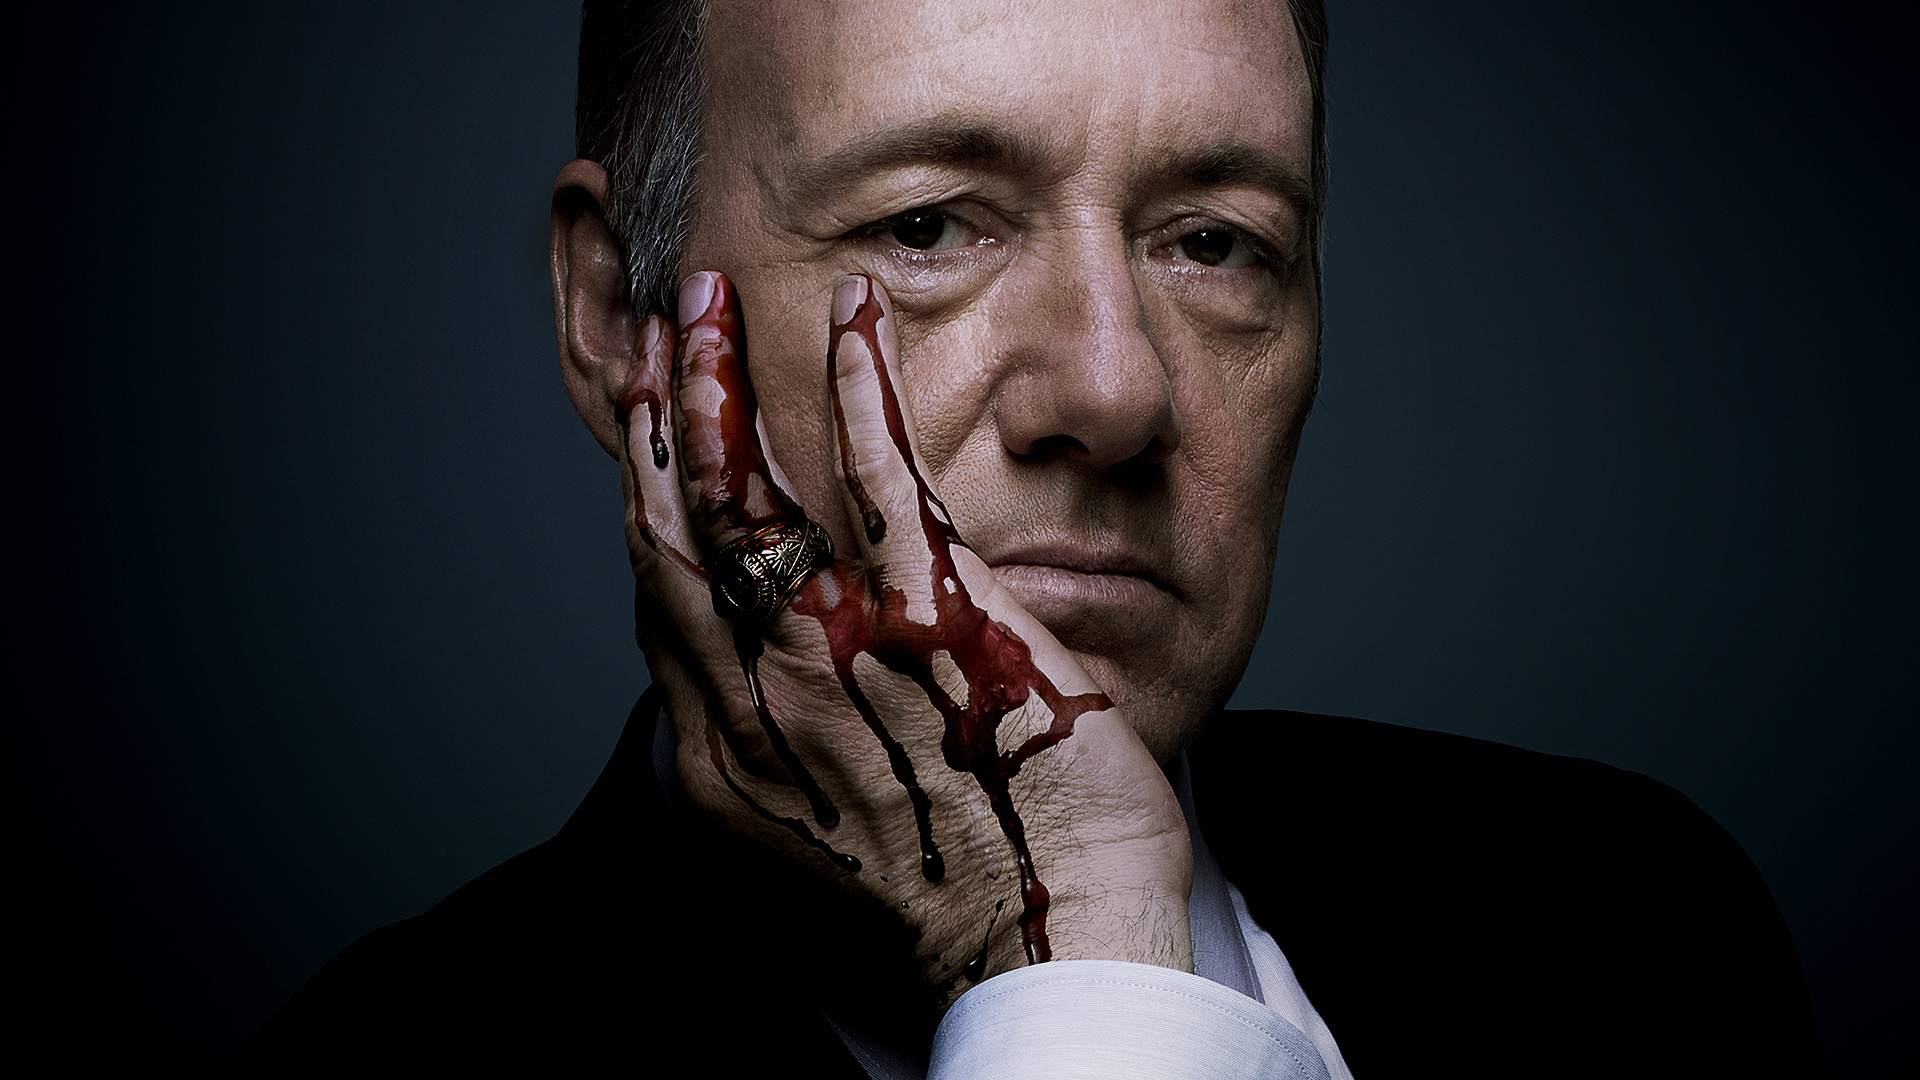 house of cards wallpaper,face,cheek,chin,nose,head